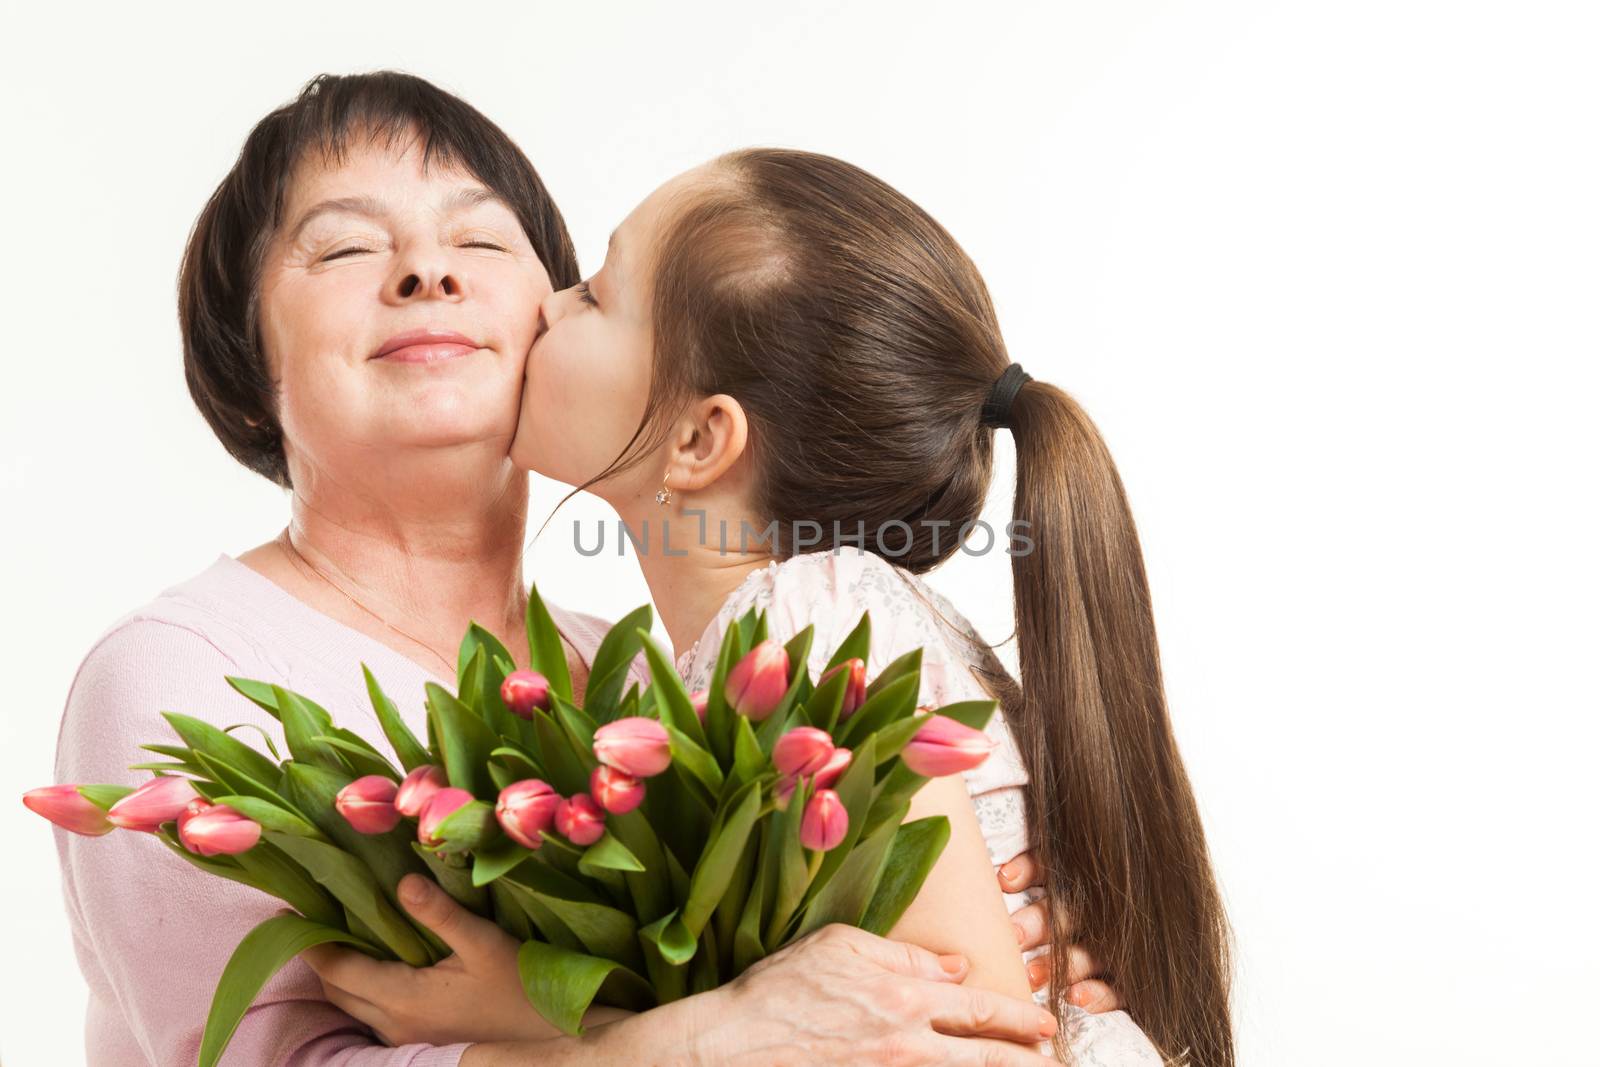 the granddaughter kisses the grandmother and gives it flowers